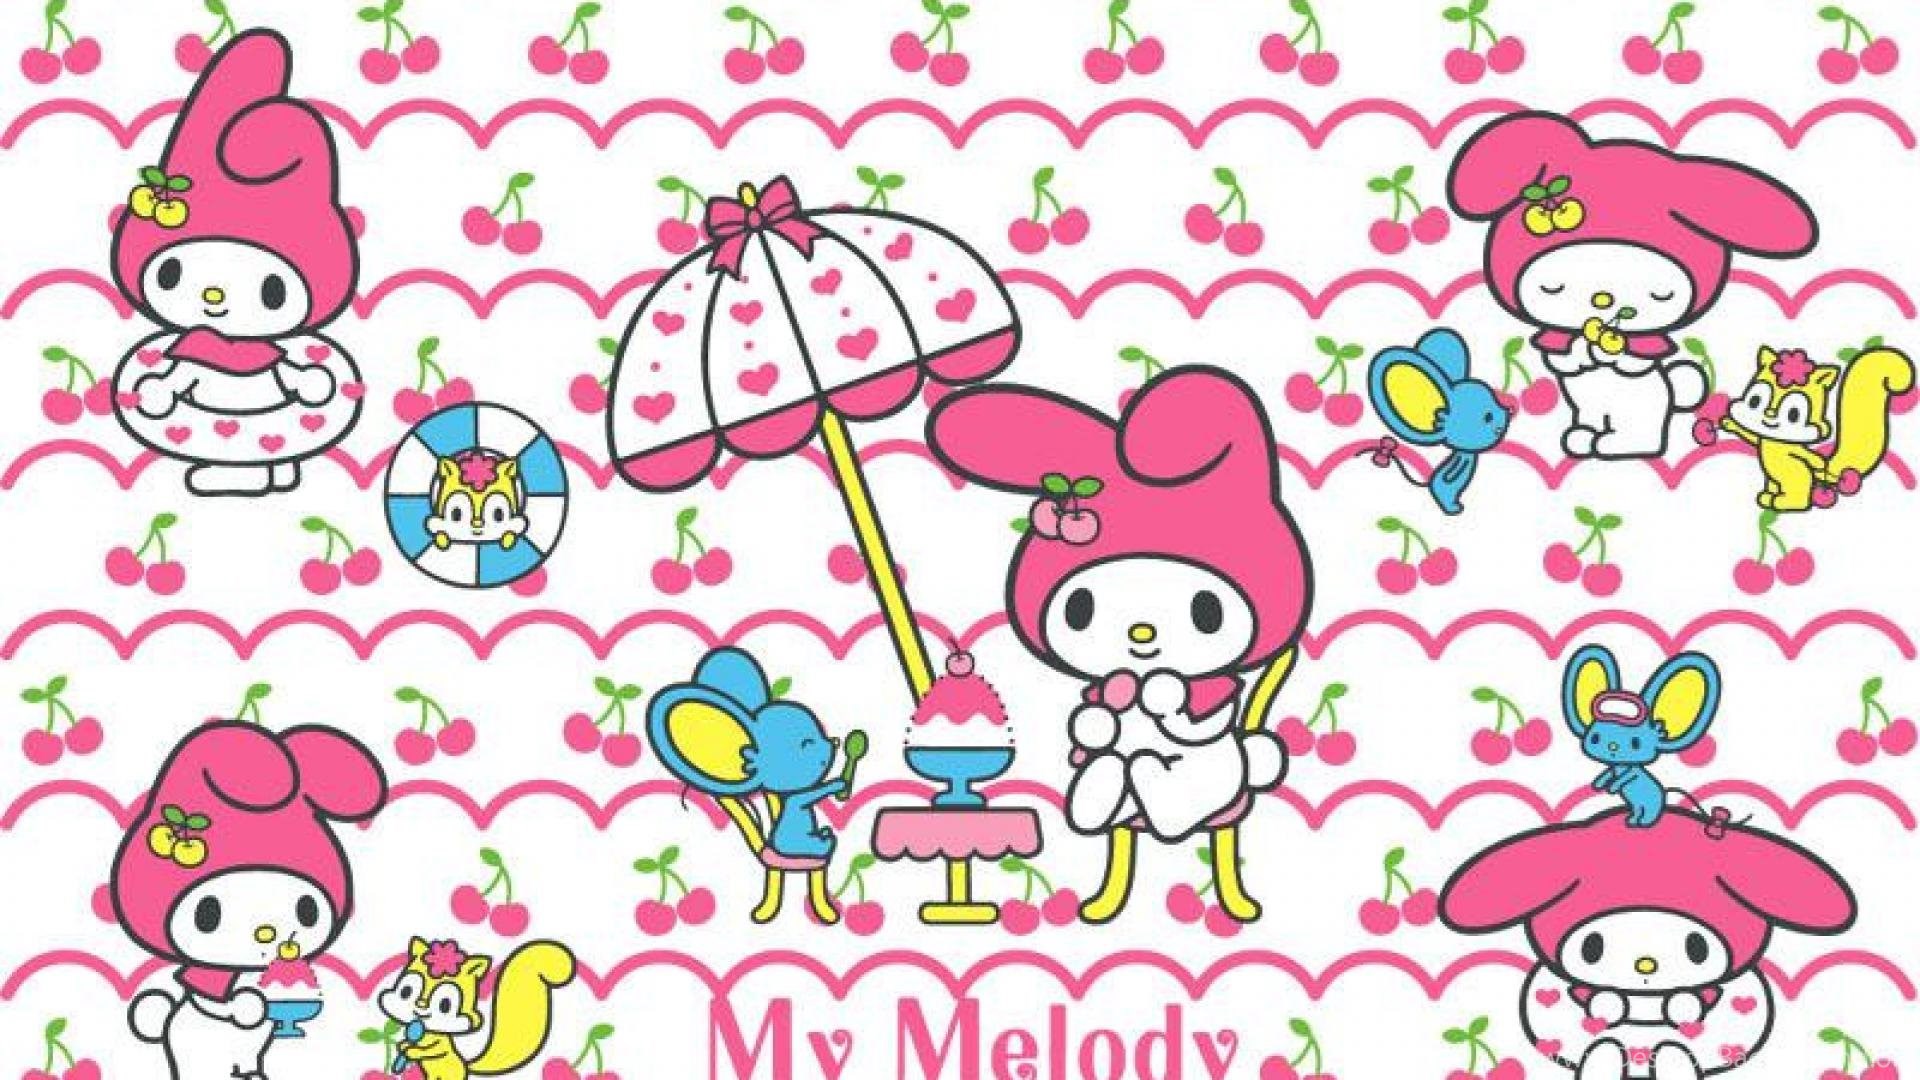 Wallpaper: My Melody, Sanrio, Cute, Pink Rabbits, Animals, Mouse. Desktop Background